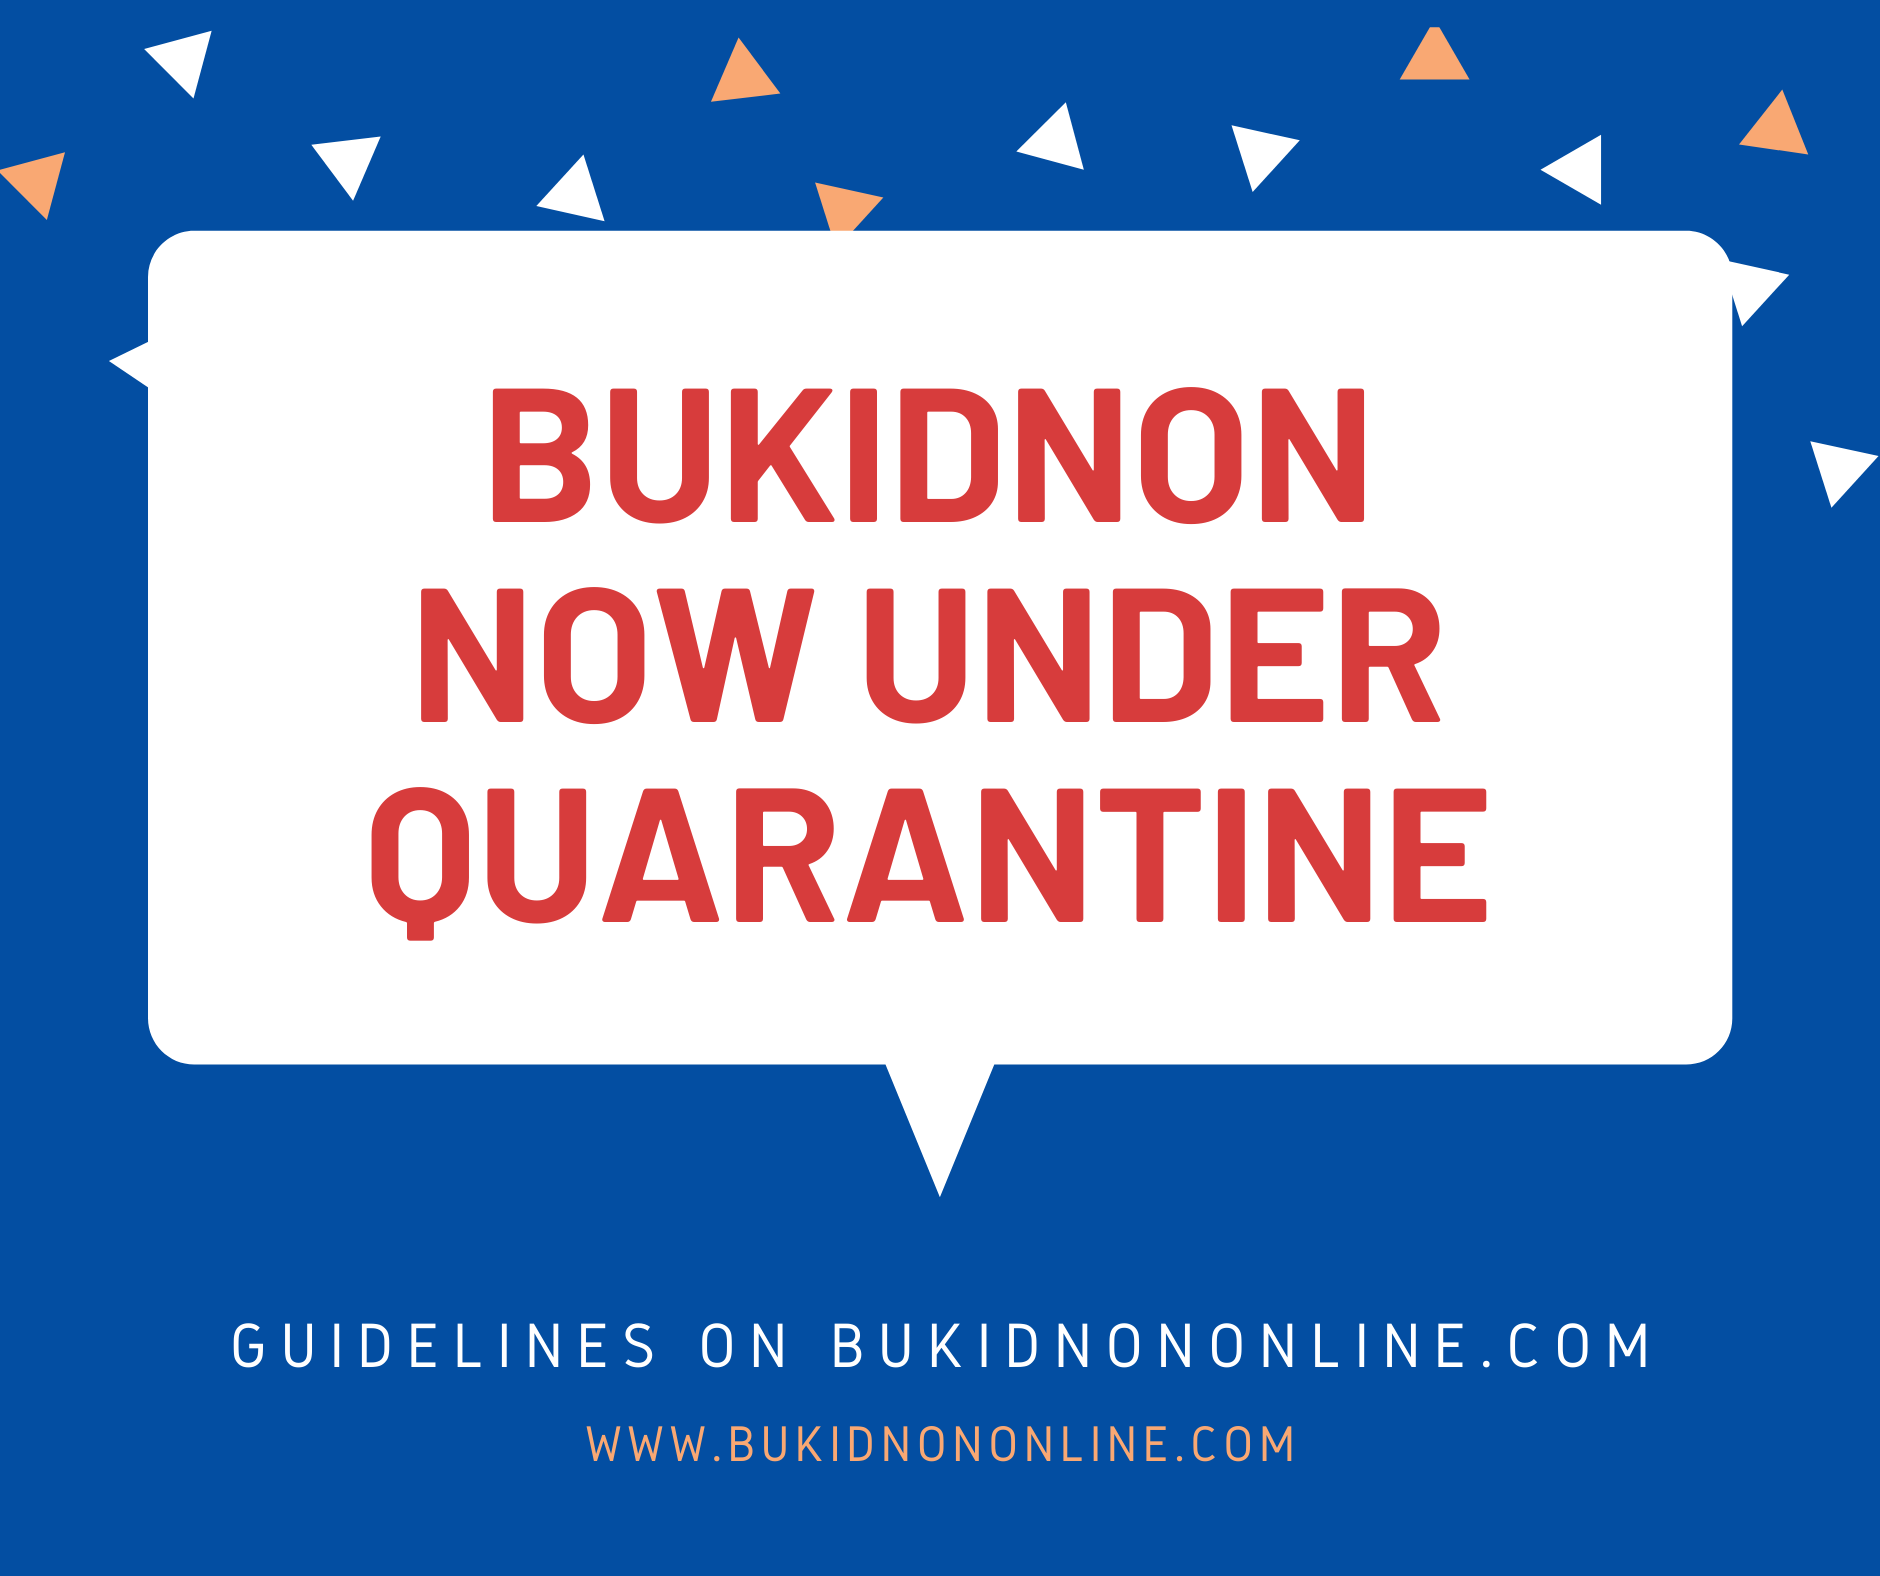 Province of Bukidnon now placed under community quarantine